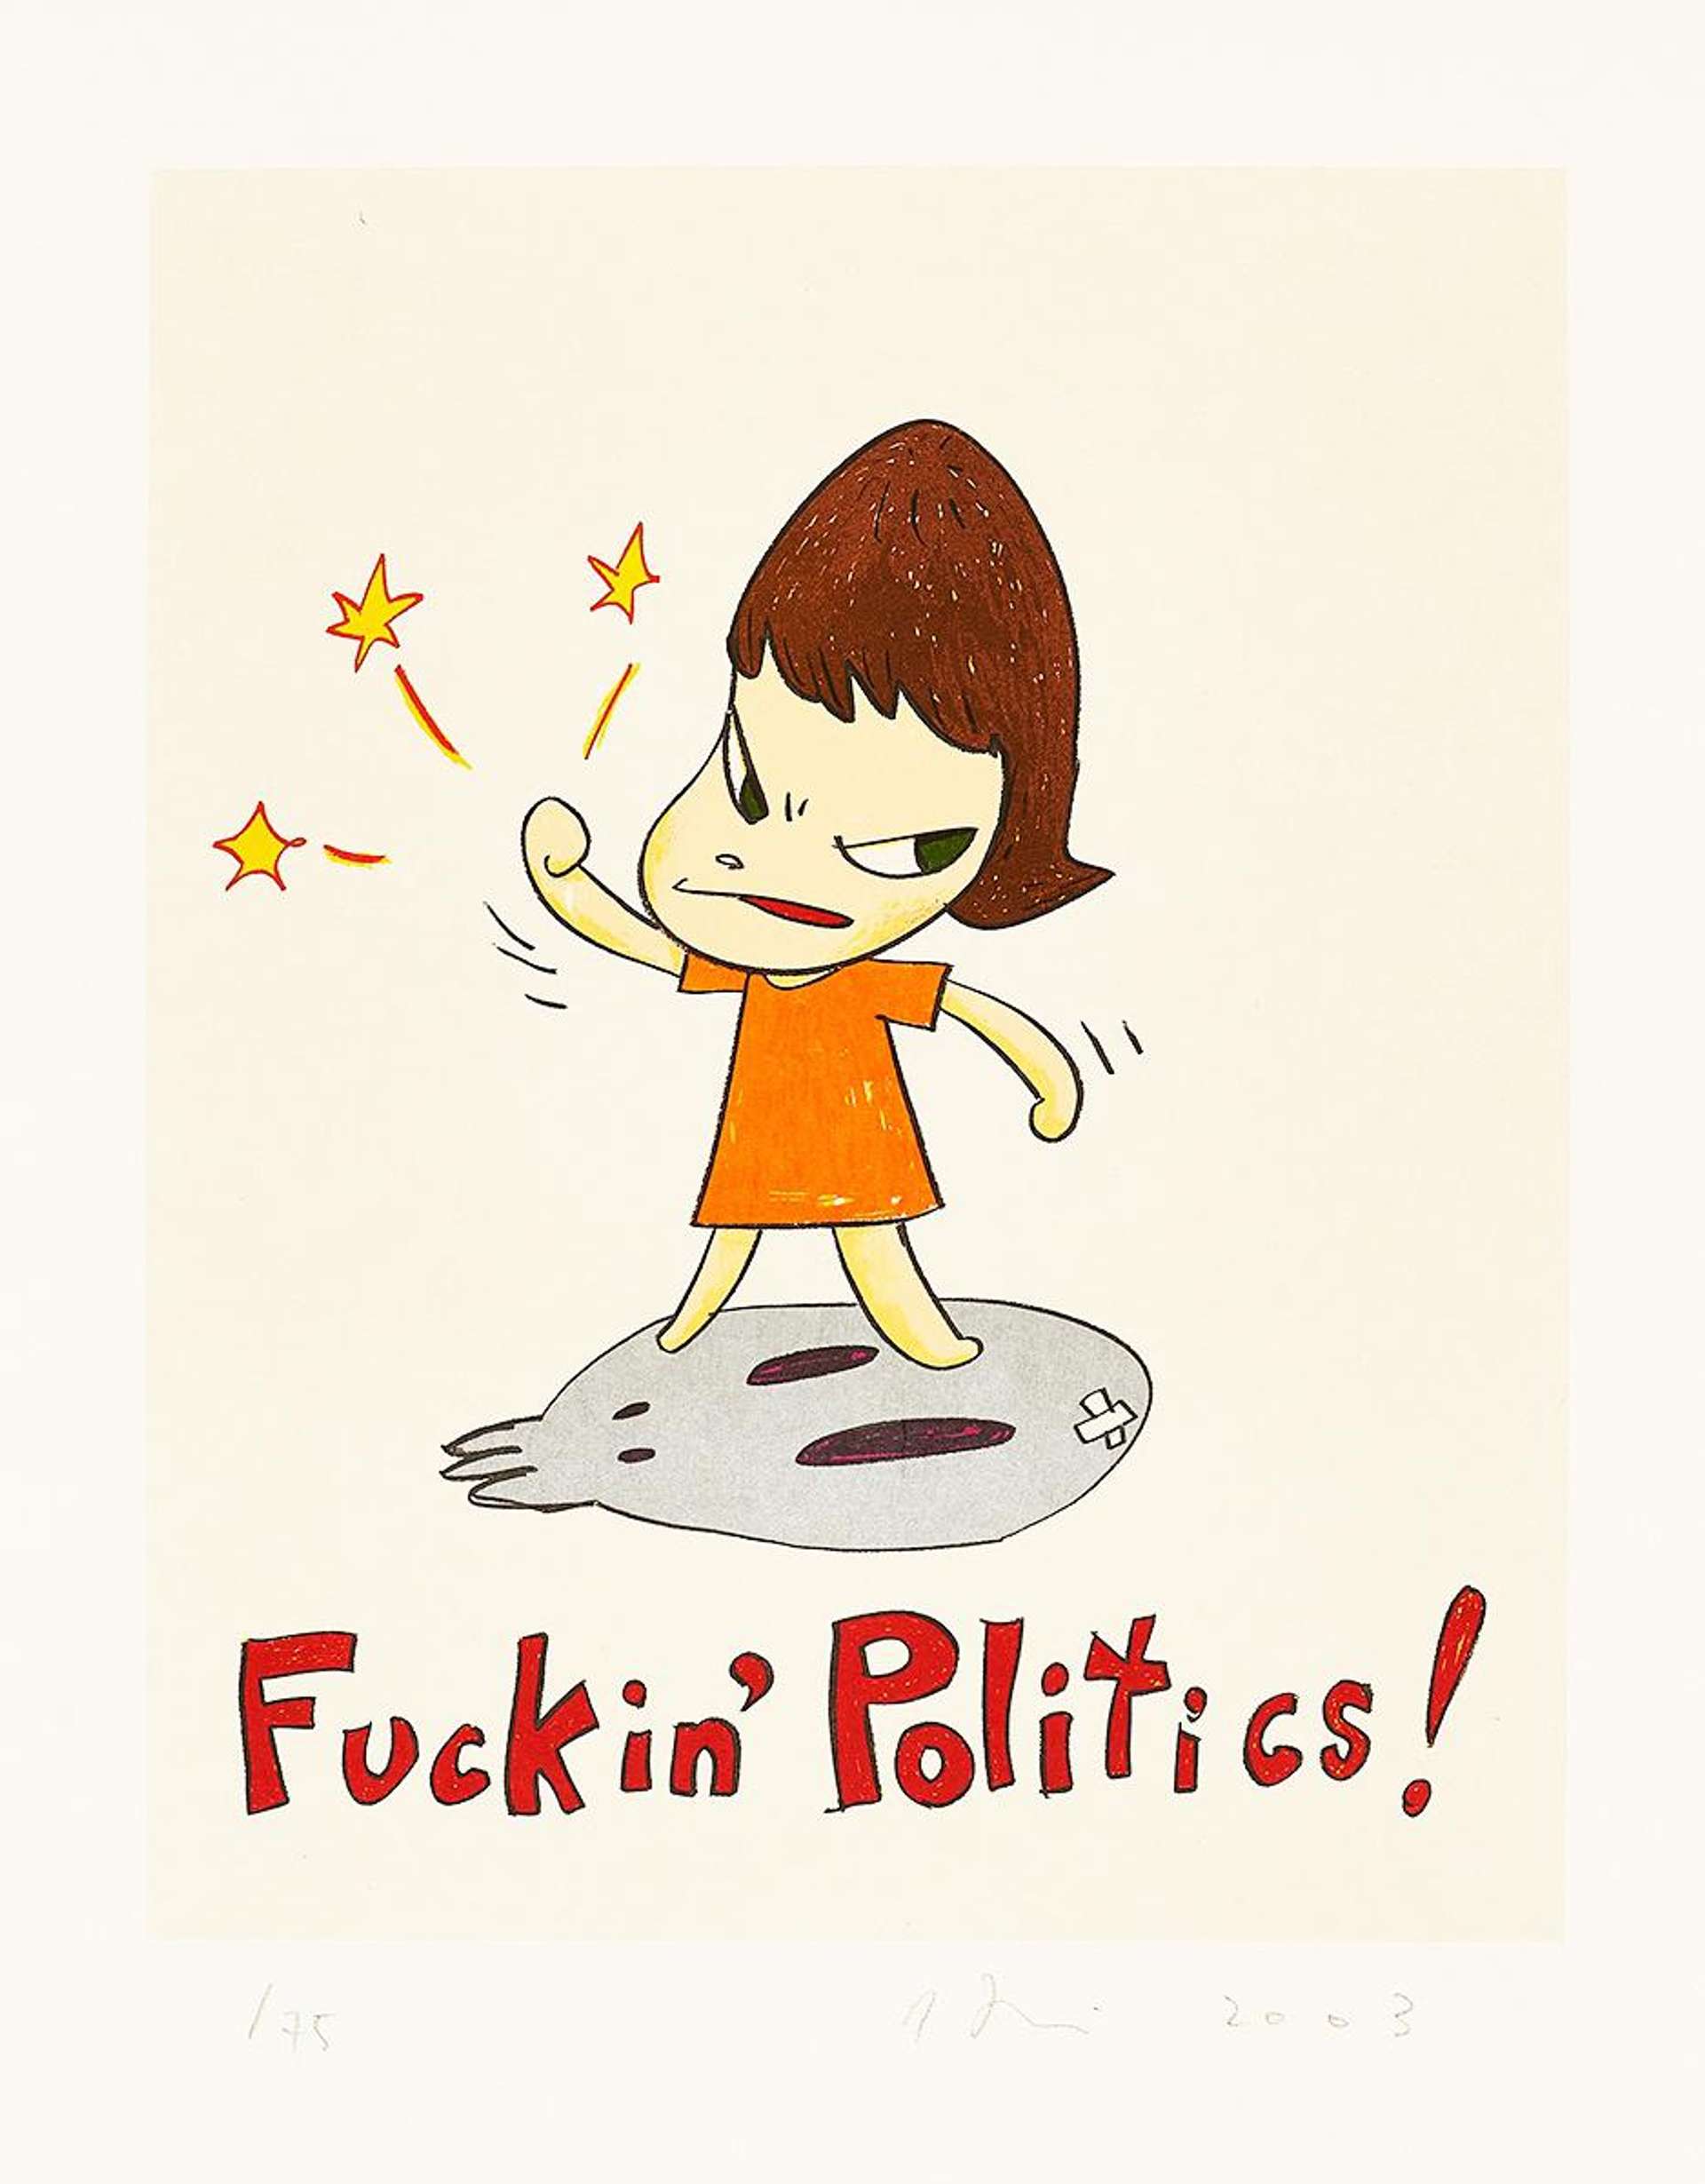 This print shows one of Nara's characters, waving her first in the air, with the title written in red at her feet.